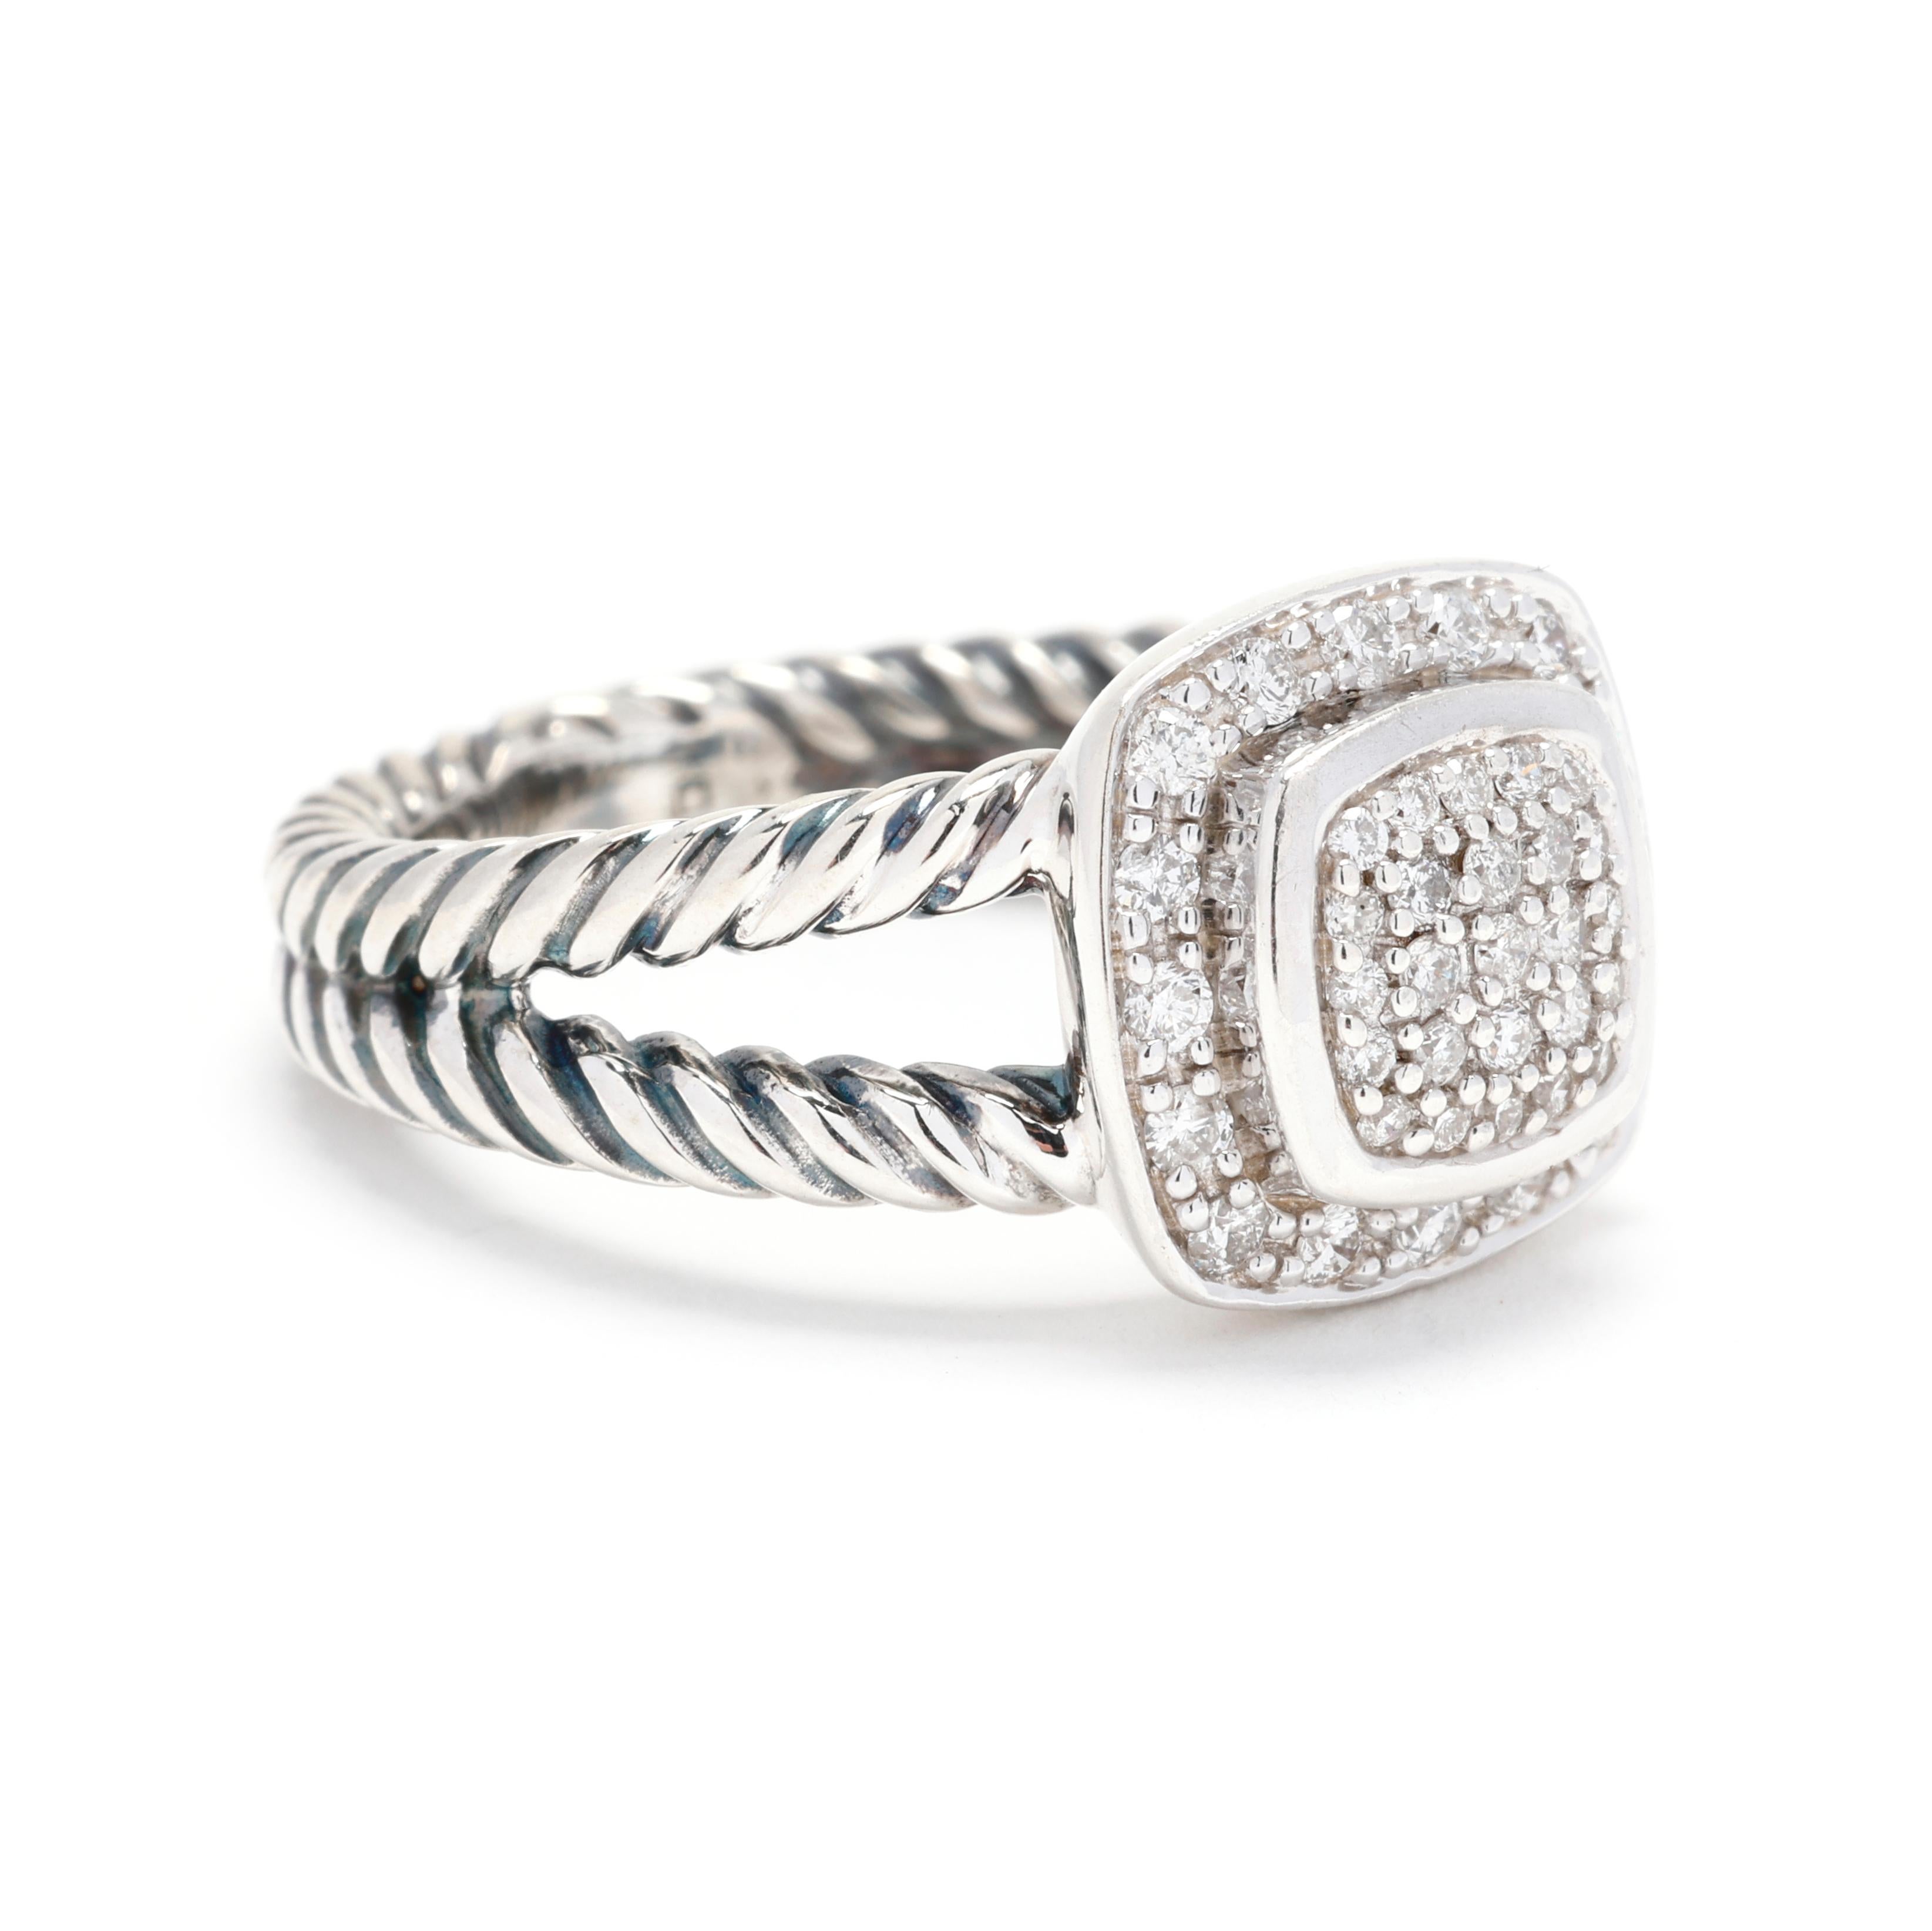 Celebrate your love with this exquisite David Yurman .38ctw Diamond and Sterling Silver Engagement Ring. Meticulously crafted in high-quality sterling silver, this stunning ring features a sparkling round brilliant diamond center stone accented with